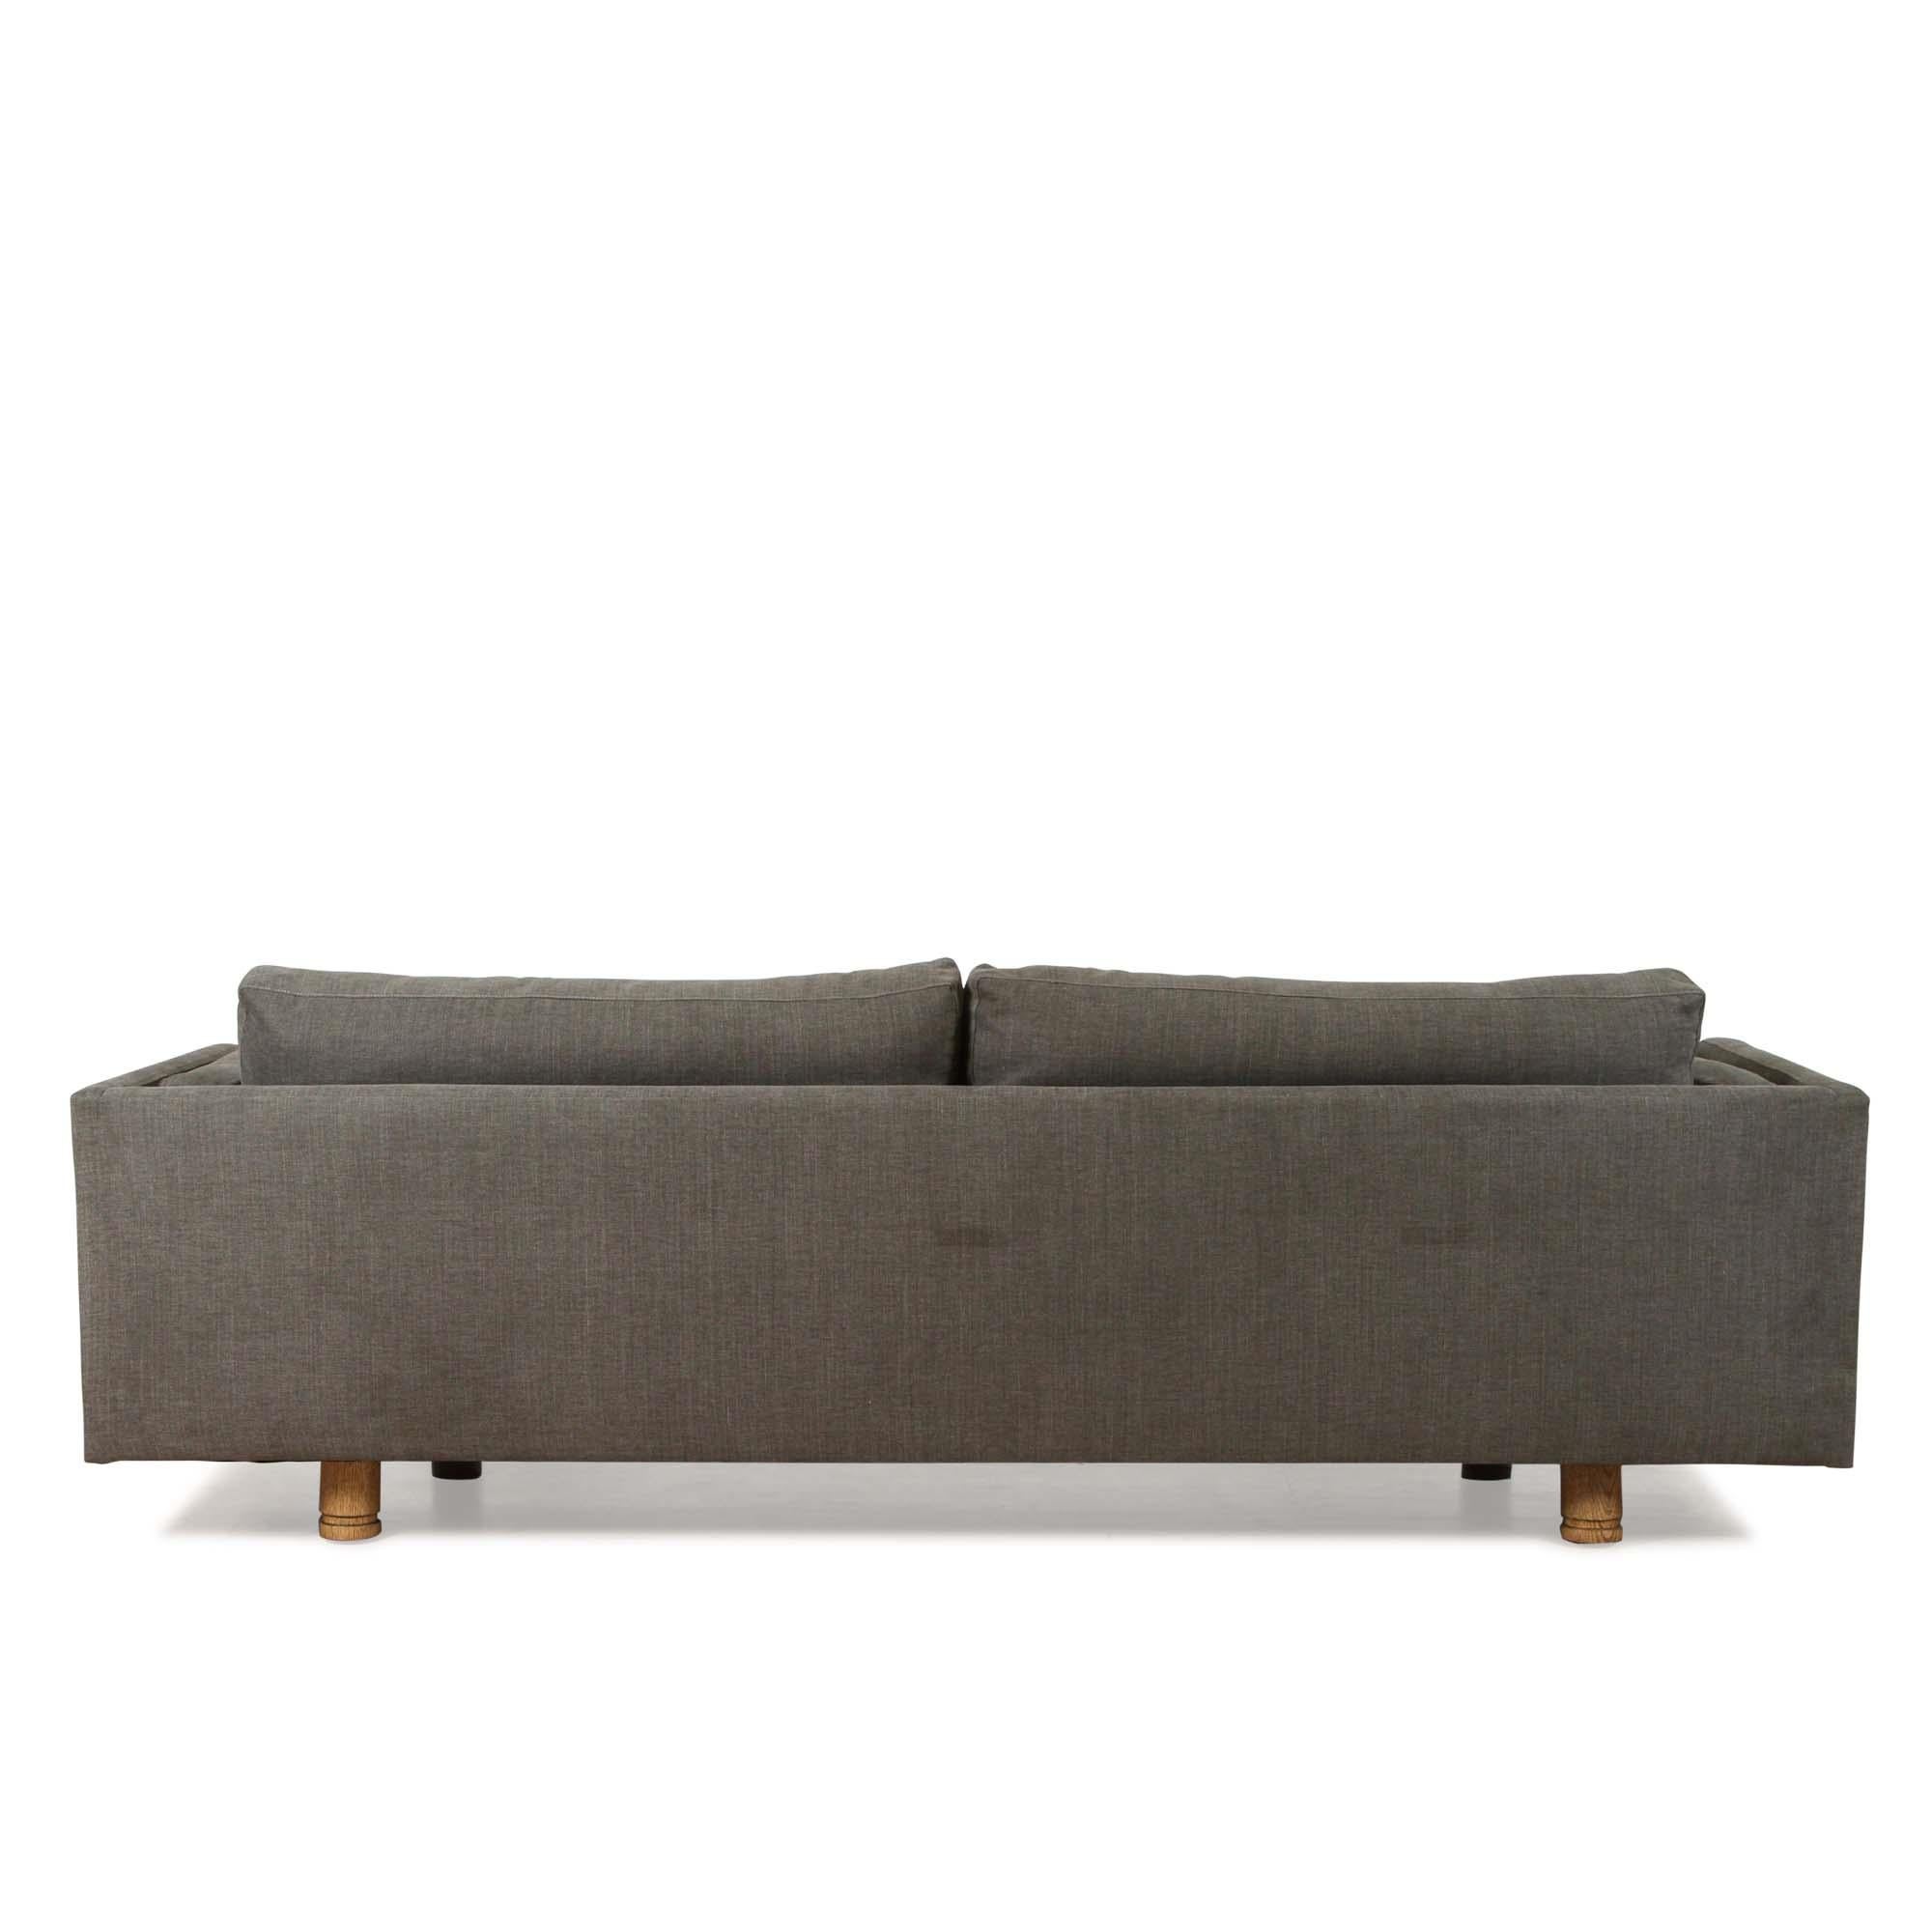 Moreno Sofa by Lawson-Fenning In New Condition For Sale In Los Angeles, CA